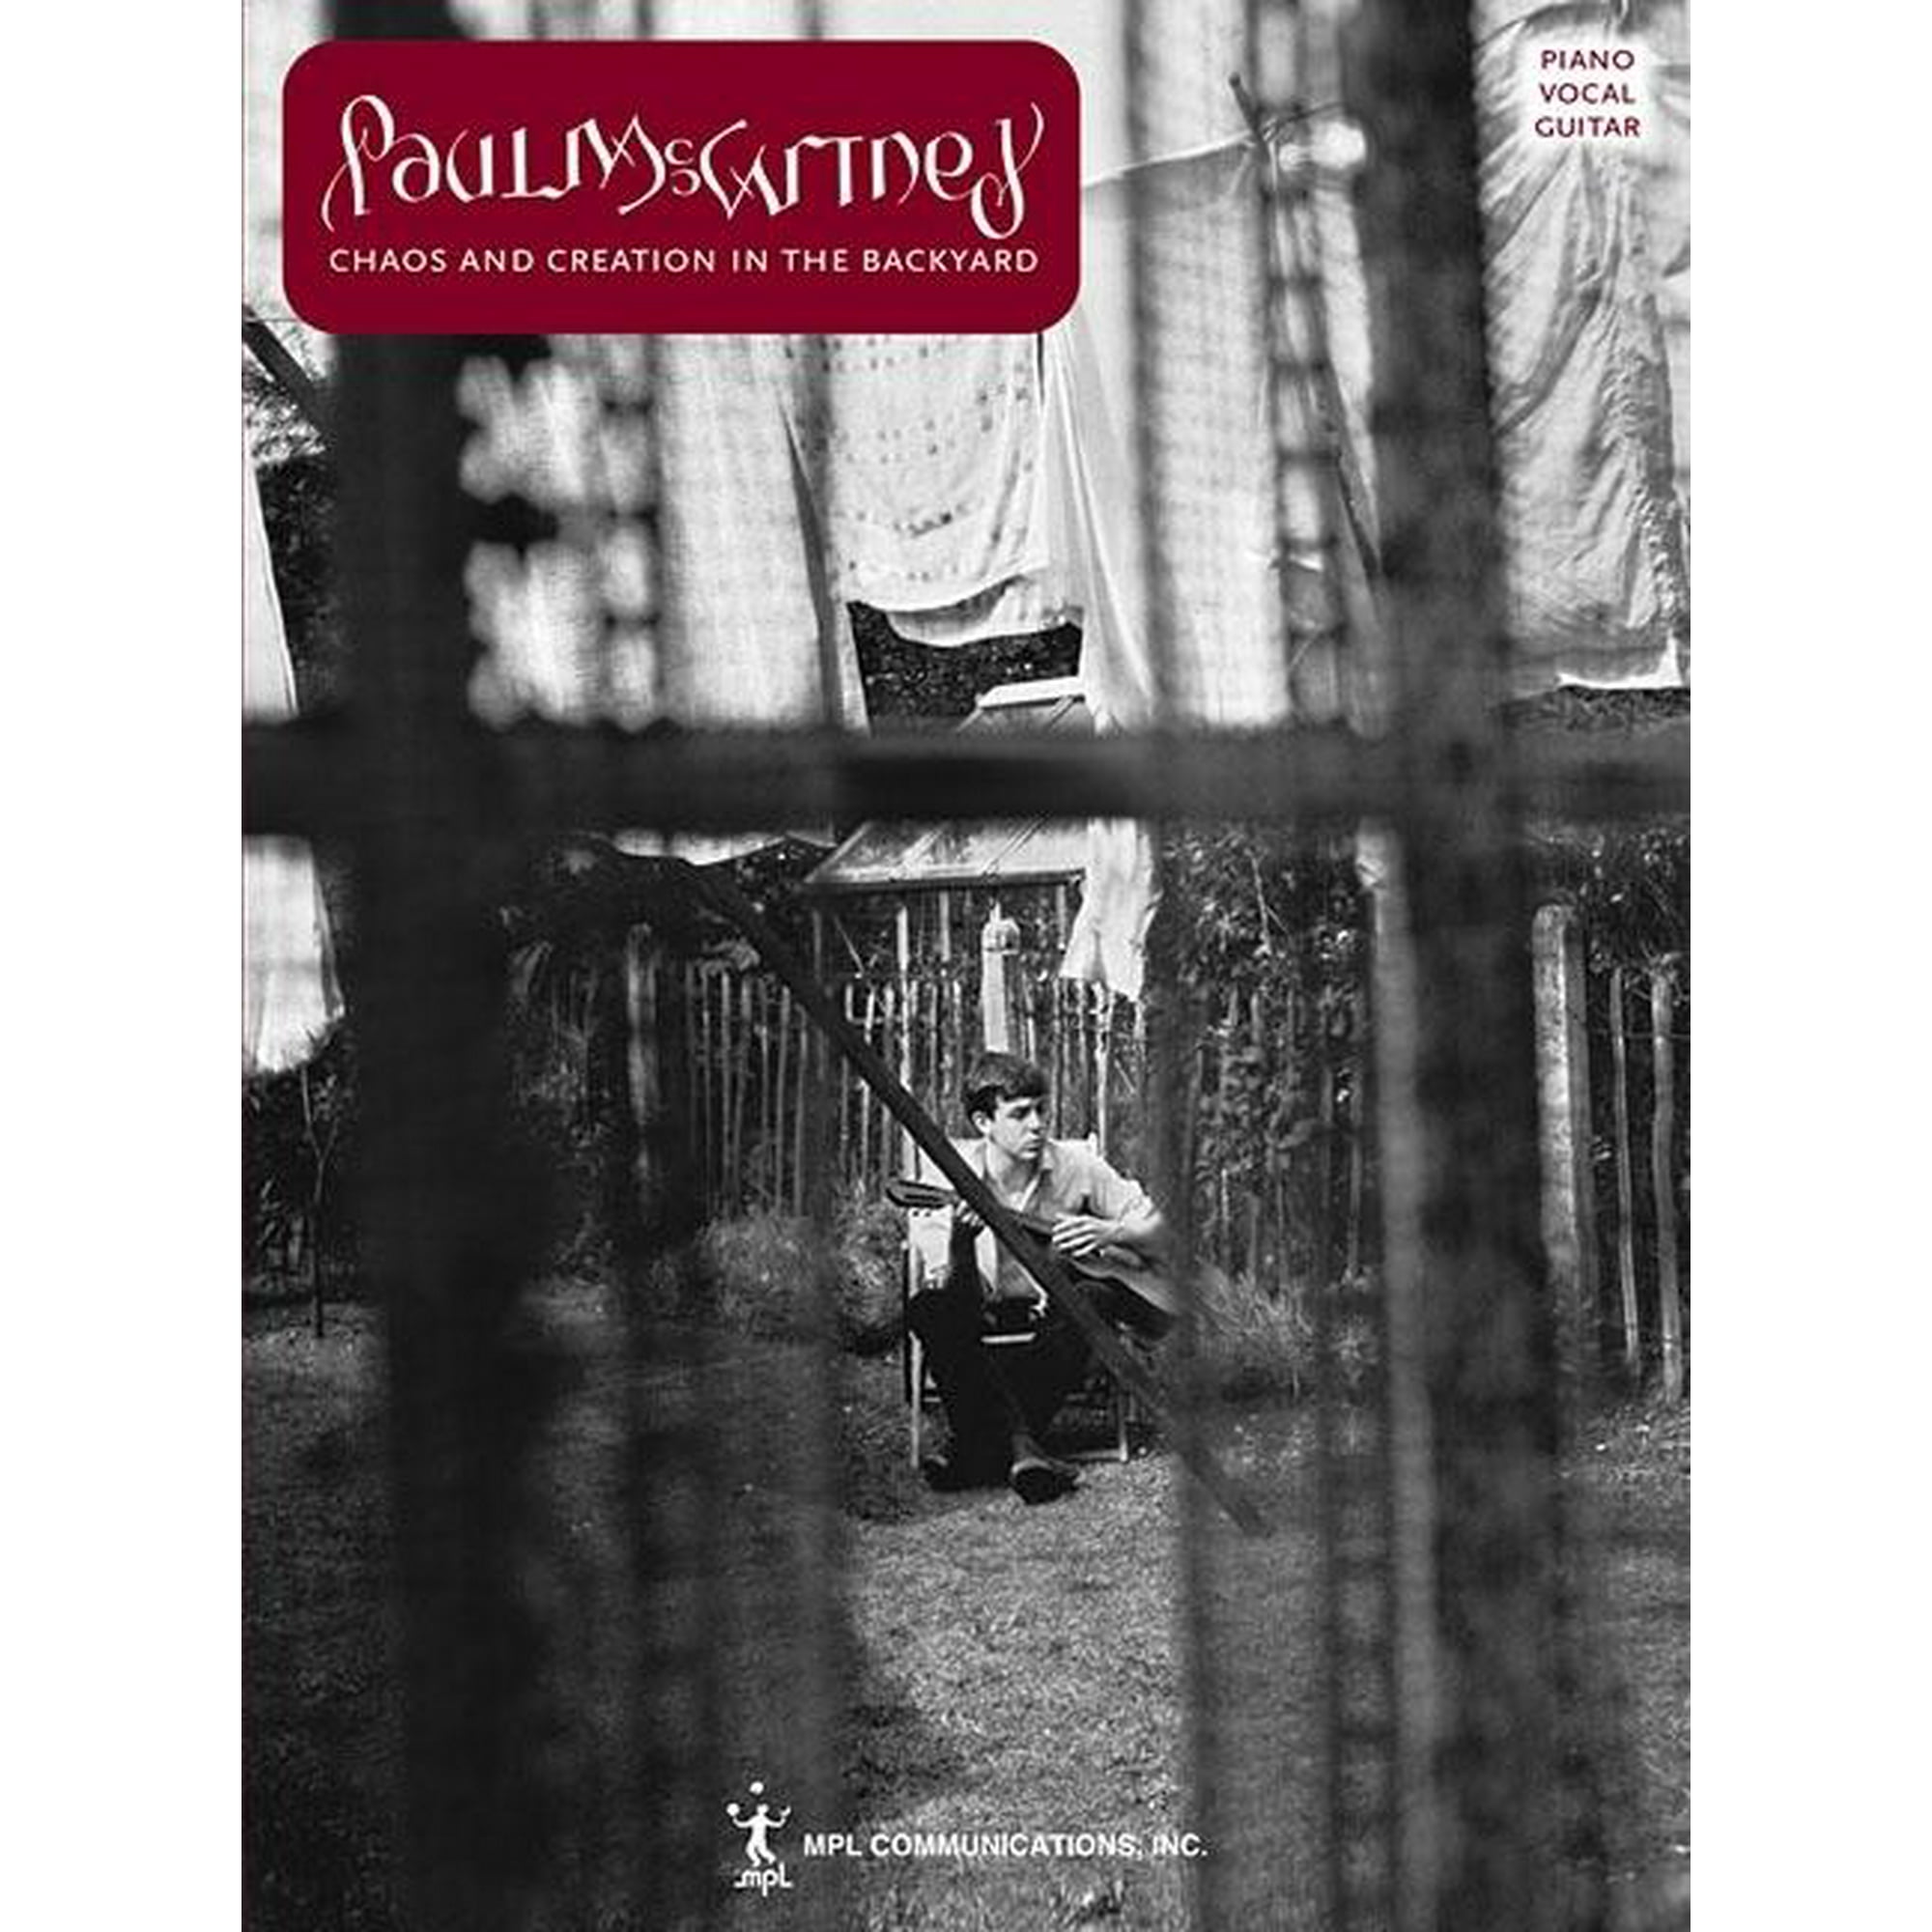 Paul McCartney - Chaos and Creation in the Backyard (Paperback)